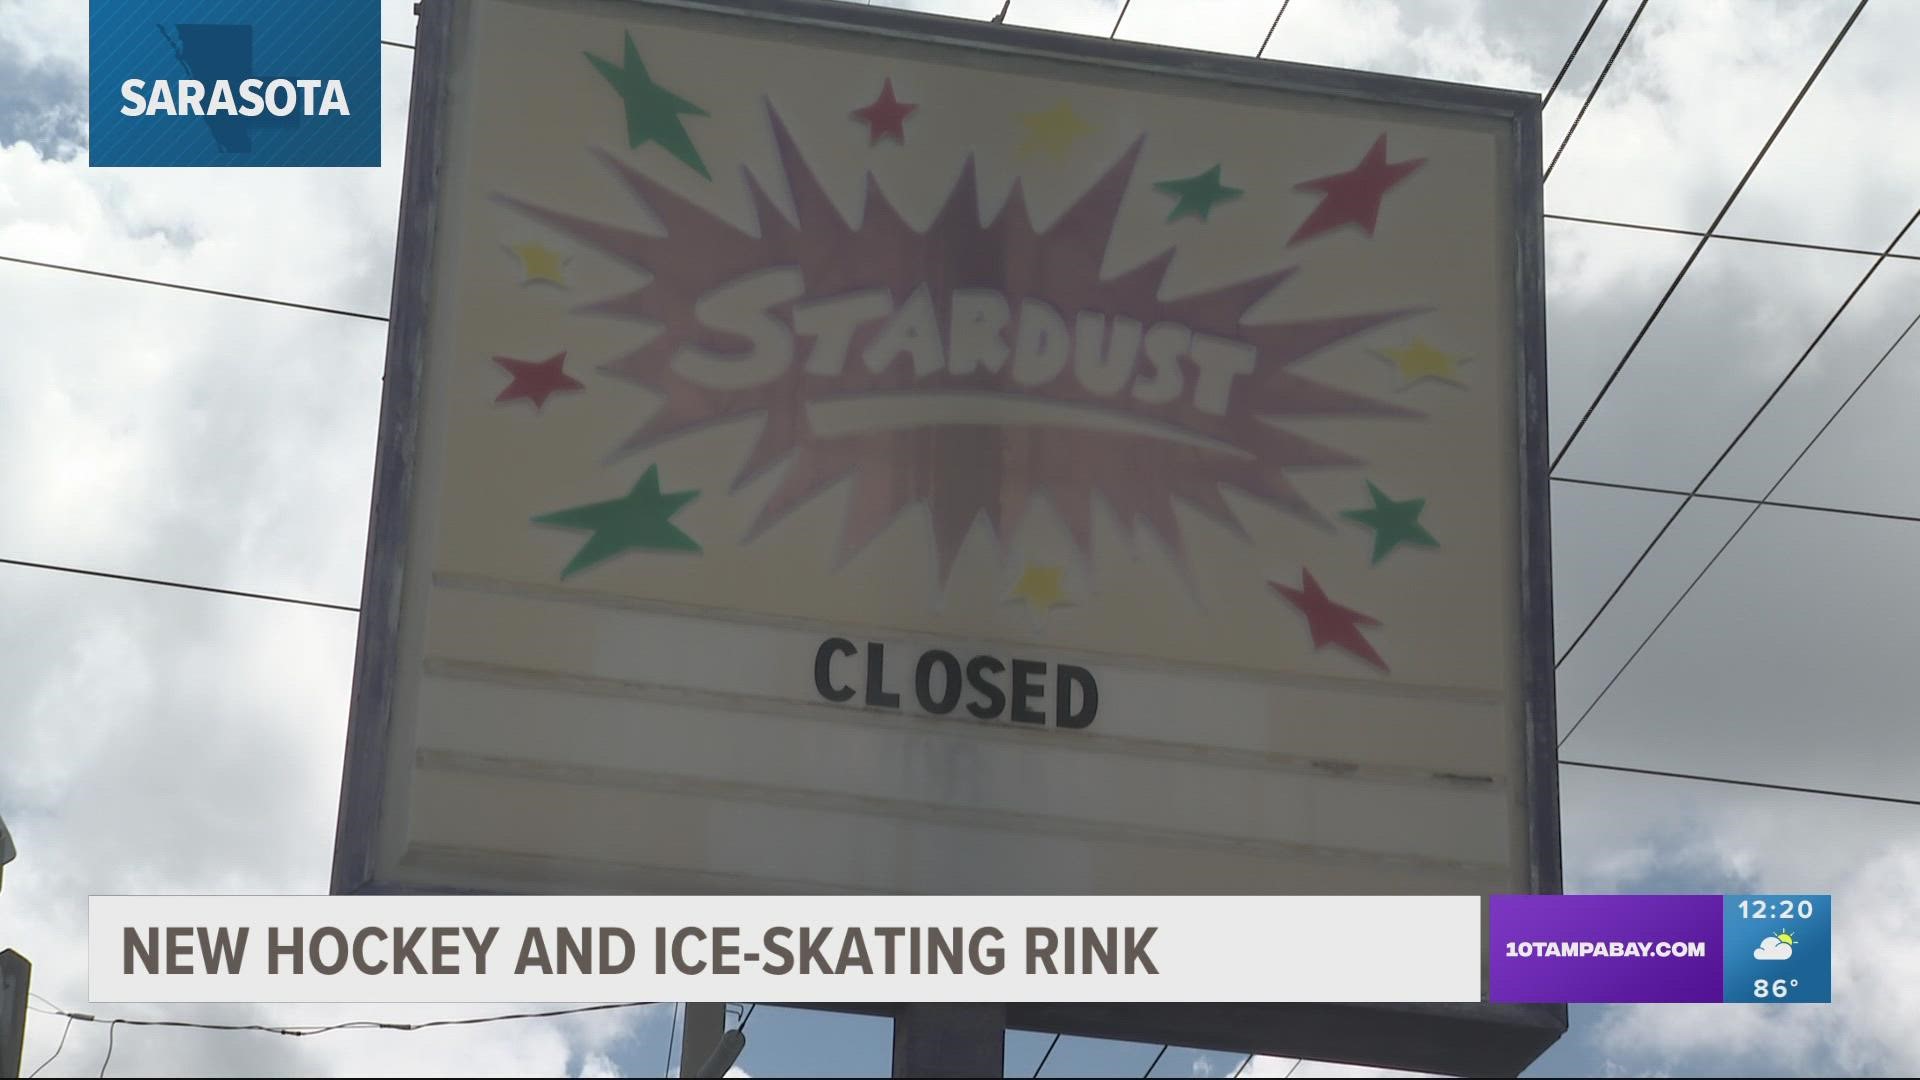 The former "Stardust Skate Center" will be turned into a rink for hockey and figure skating.